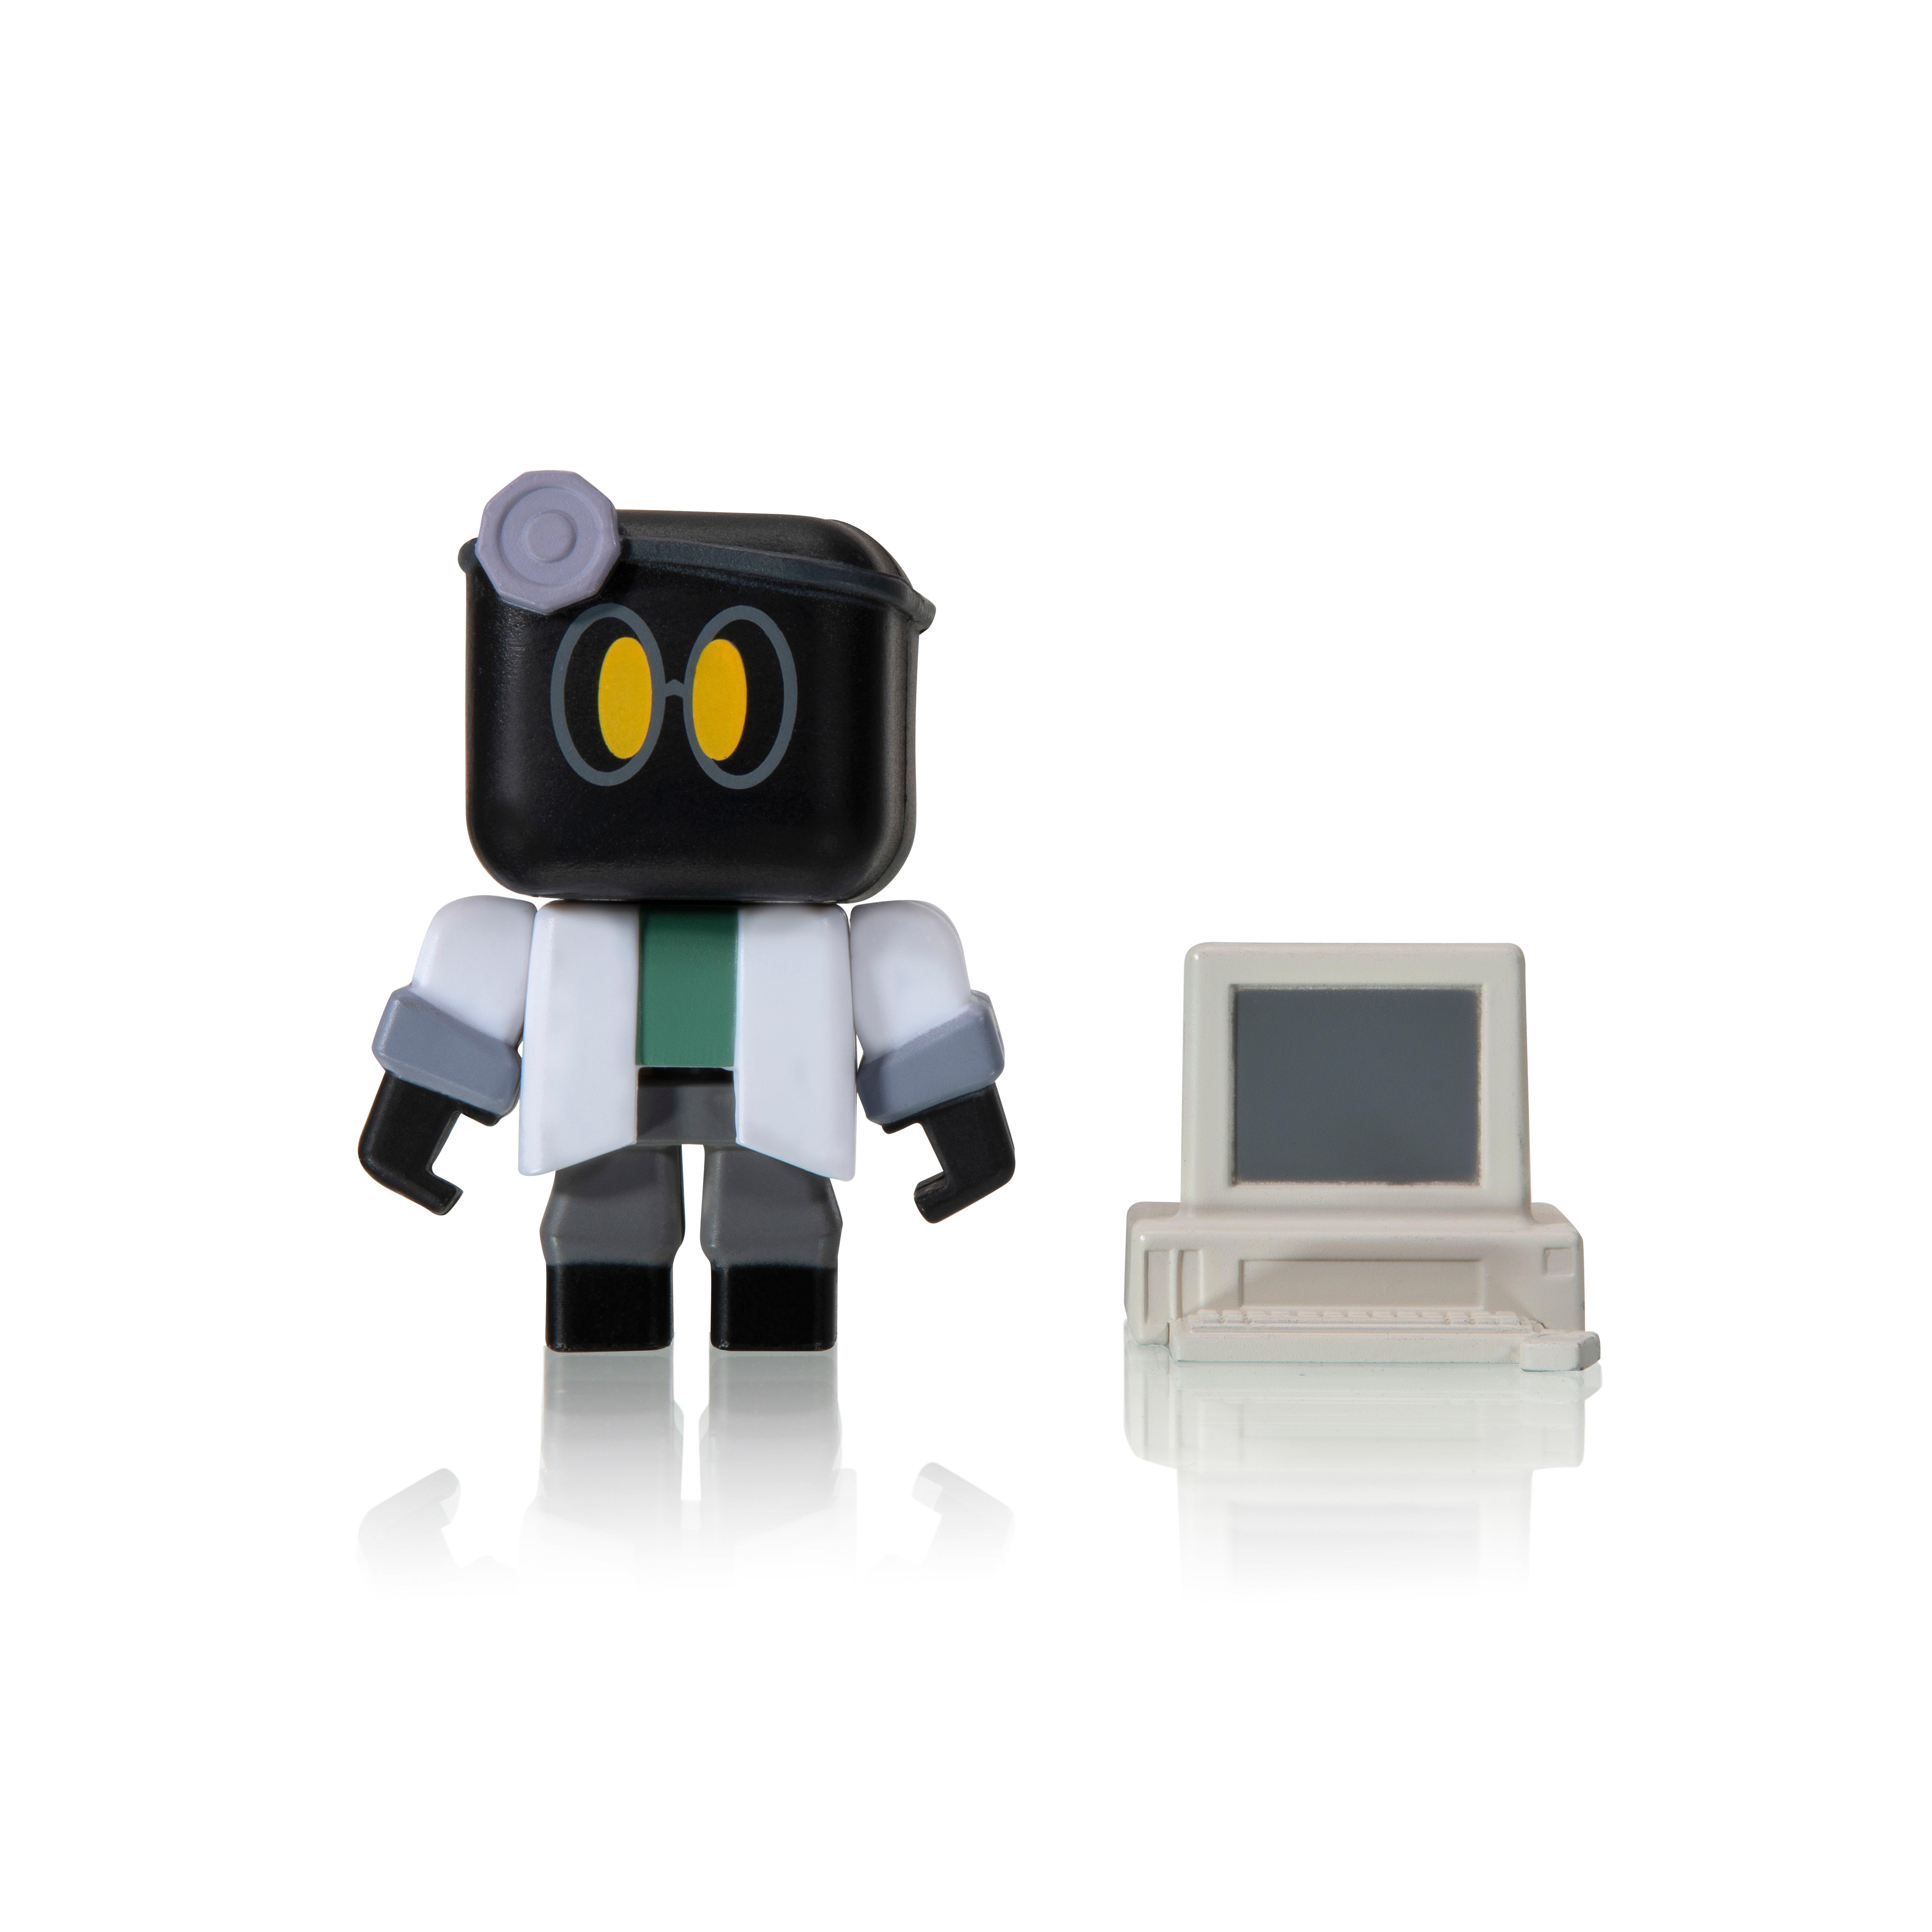 Roblox Action Collection Series 8 Mystery Figure Includes 1 Figure And Exclusive Virtual Item Gamestop - robot roblox toy